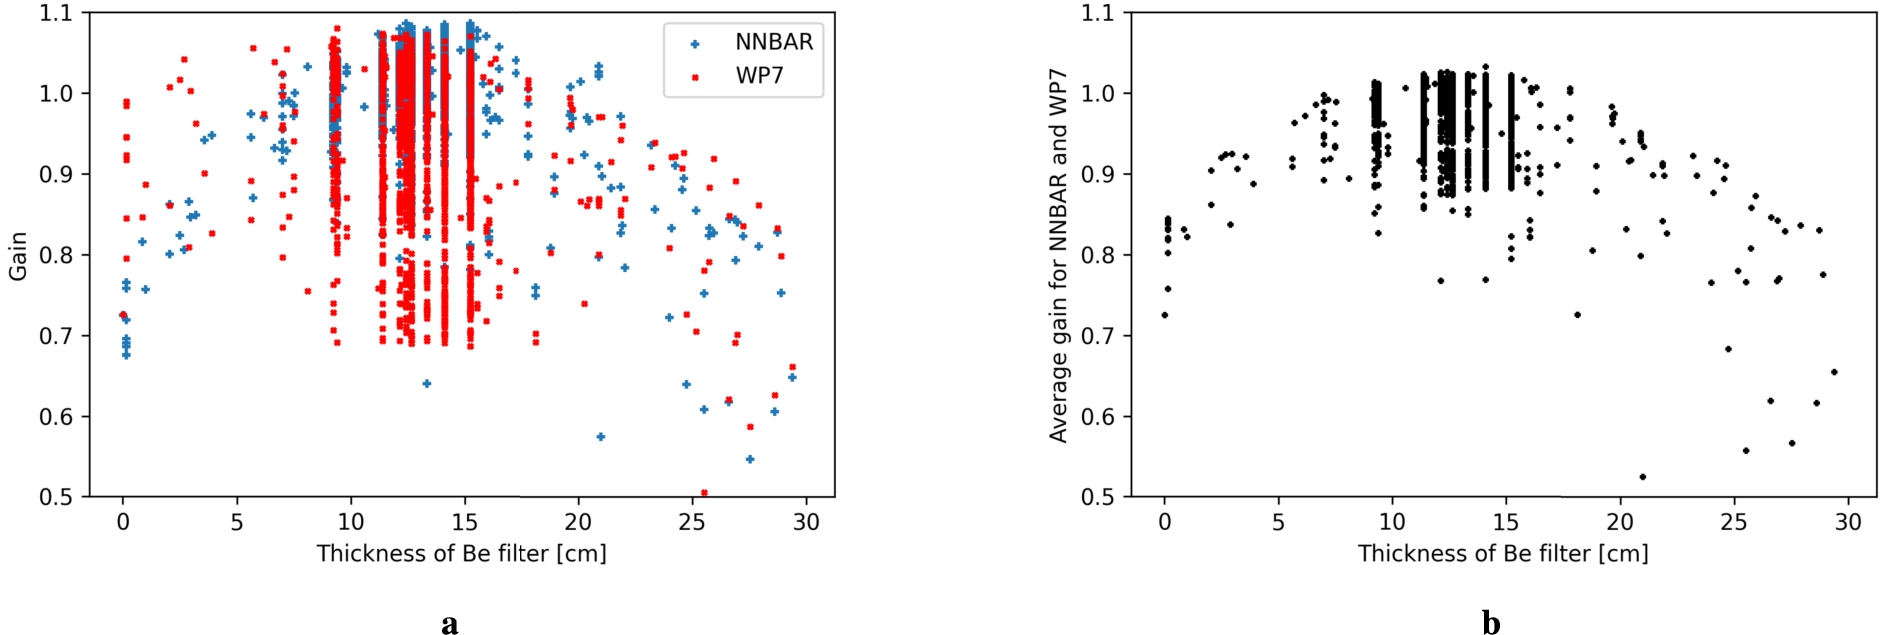 Performance of models with respect to Be filter thickness. (A) gain in NNBAR and WP7 FOM with respect to the baseline model. (B) average gain in NNBAR and WP7 FOM with respect to the baseline model.